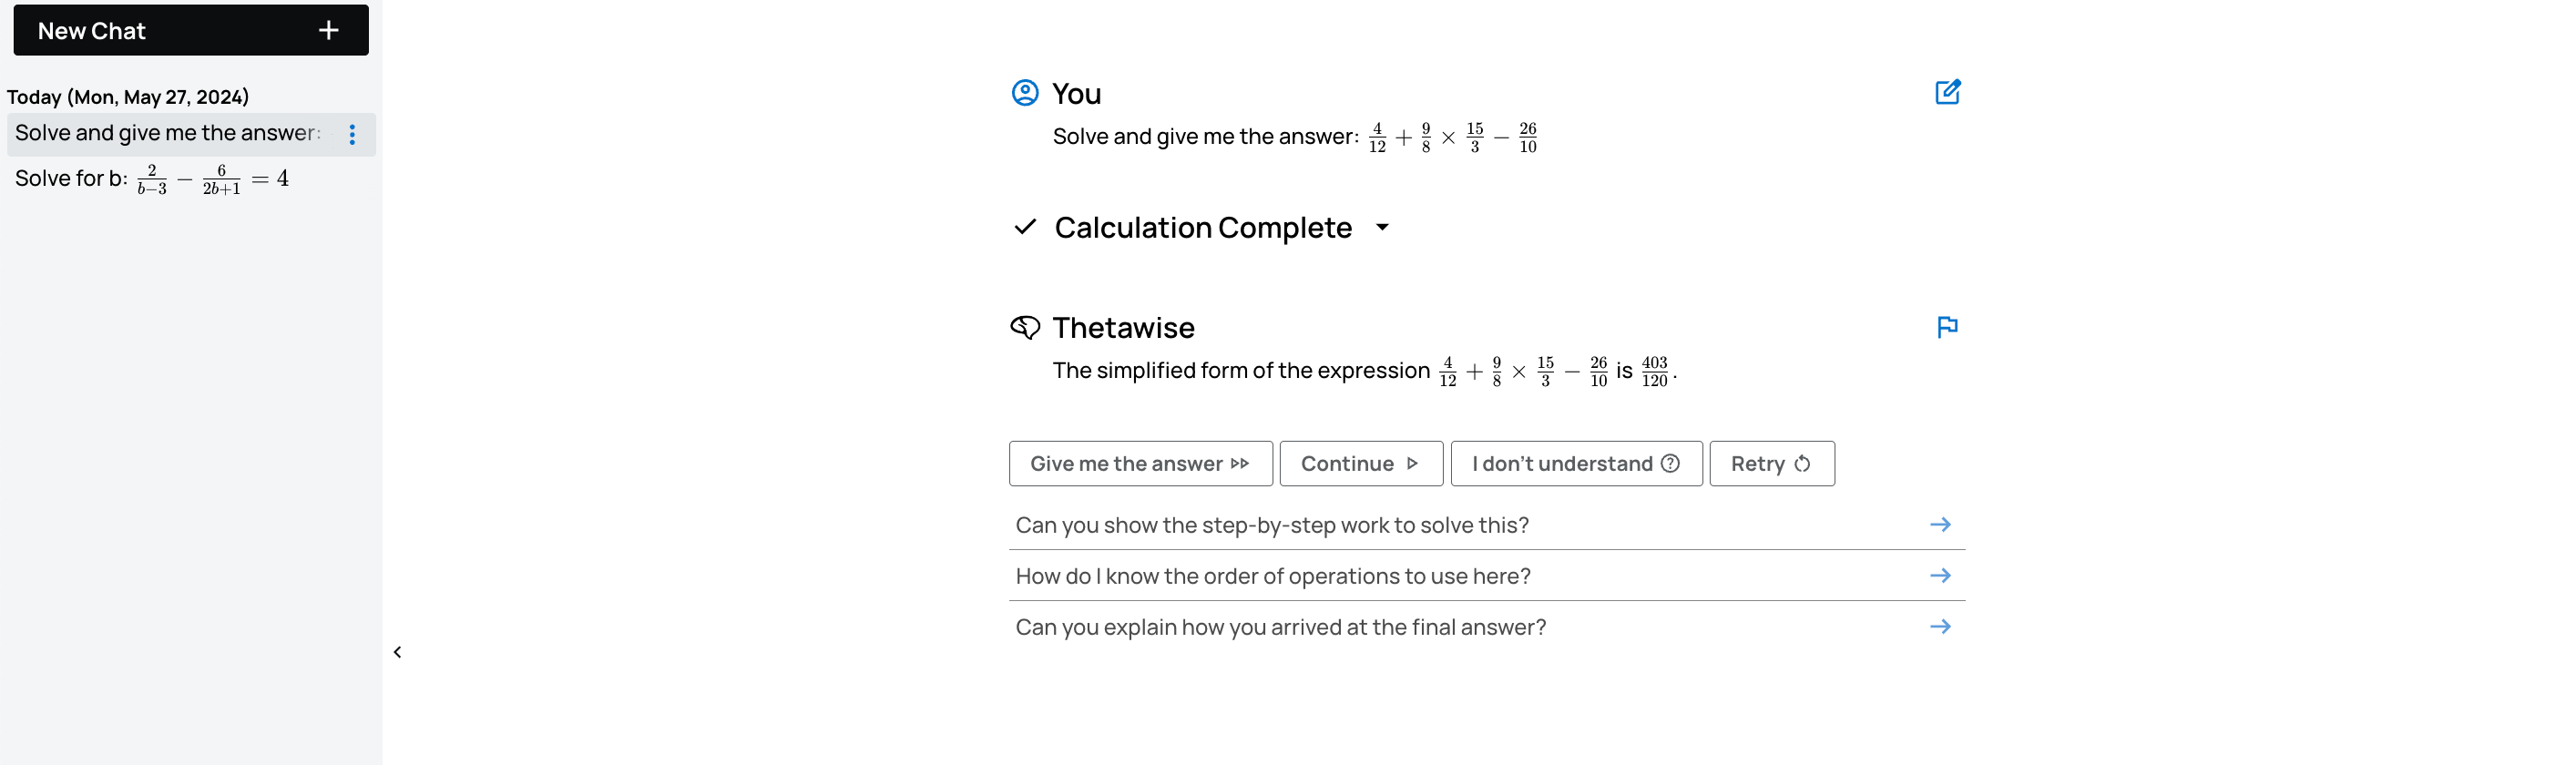 Using Thetawise to simply a fractional expression